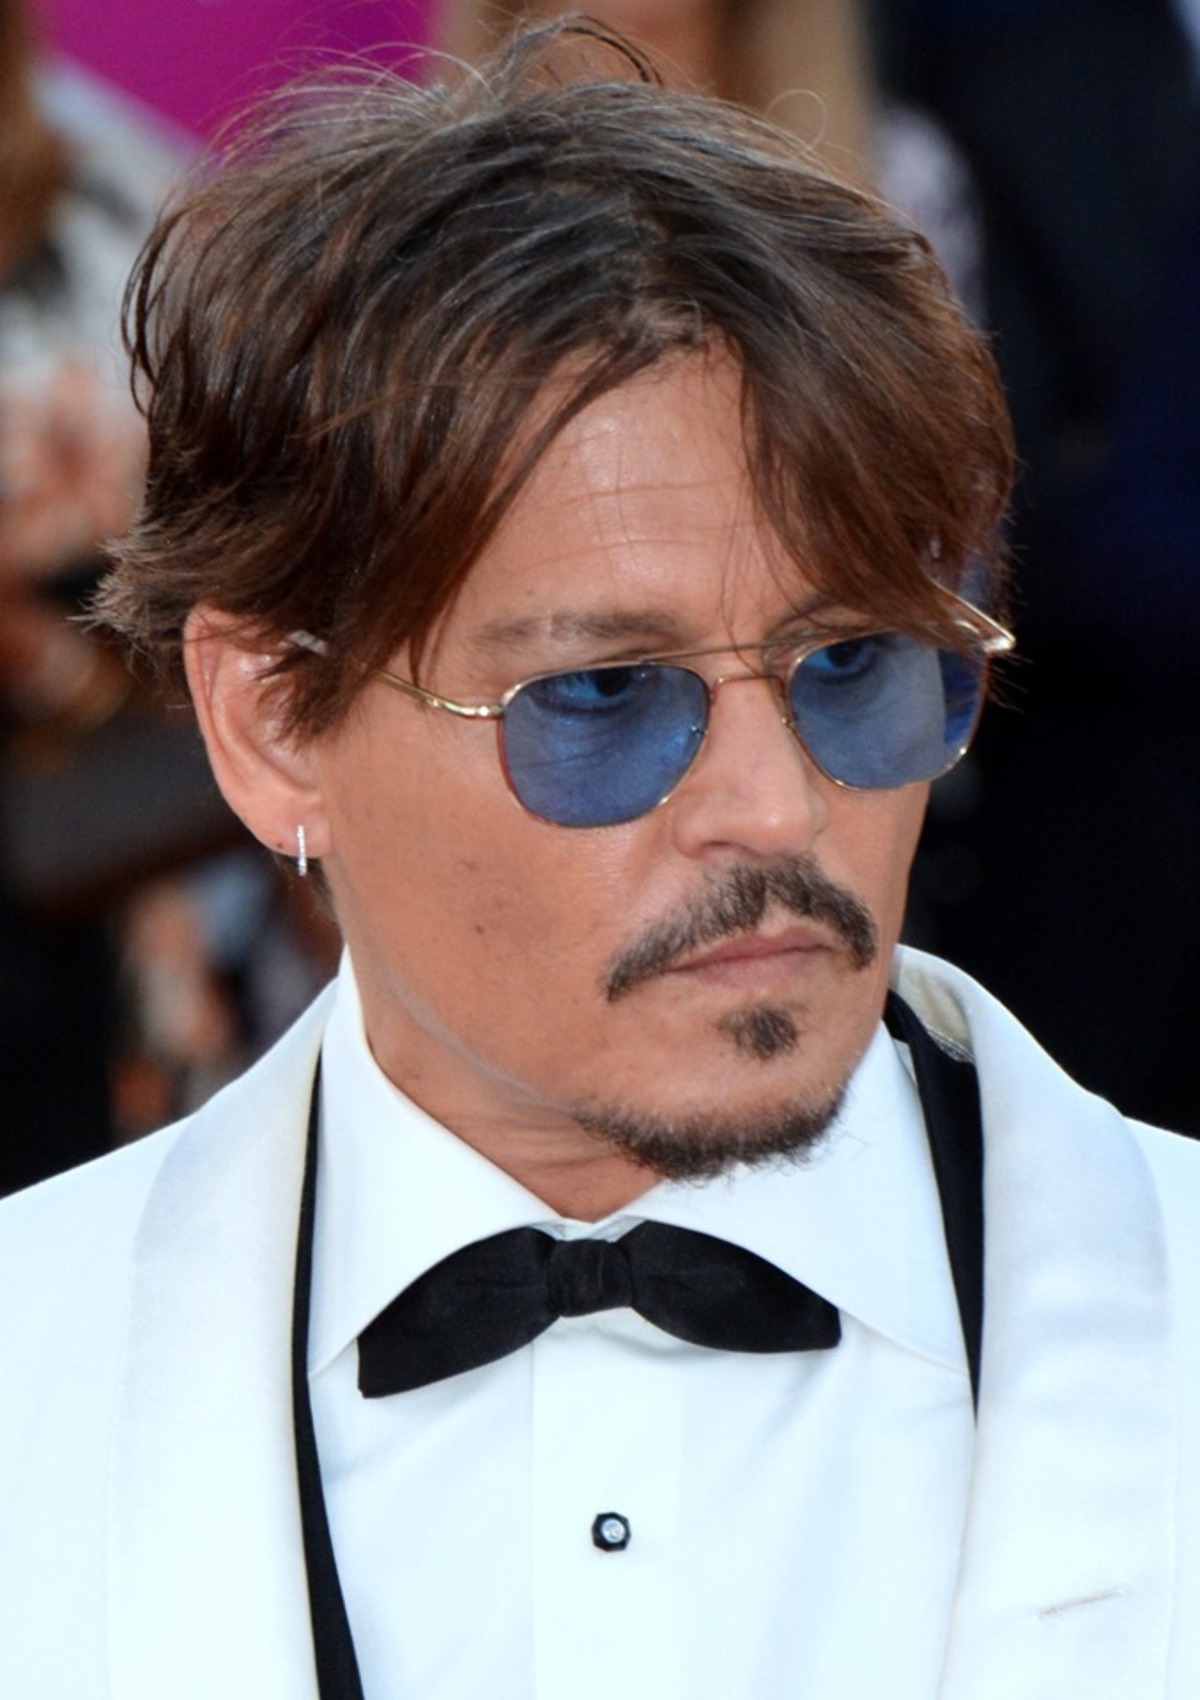 Johnny DEPP - Par Georges Biard, CC BY-SA 4.0, https://commons.wikimedia.org/w/index.php?curid=82155850